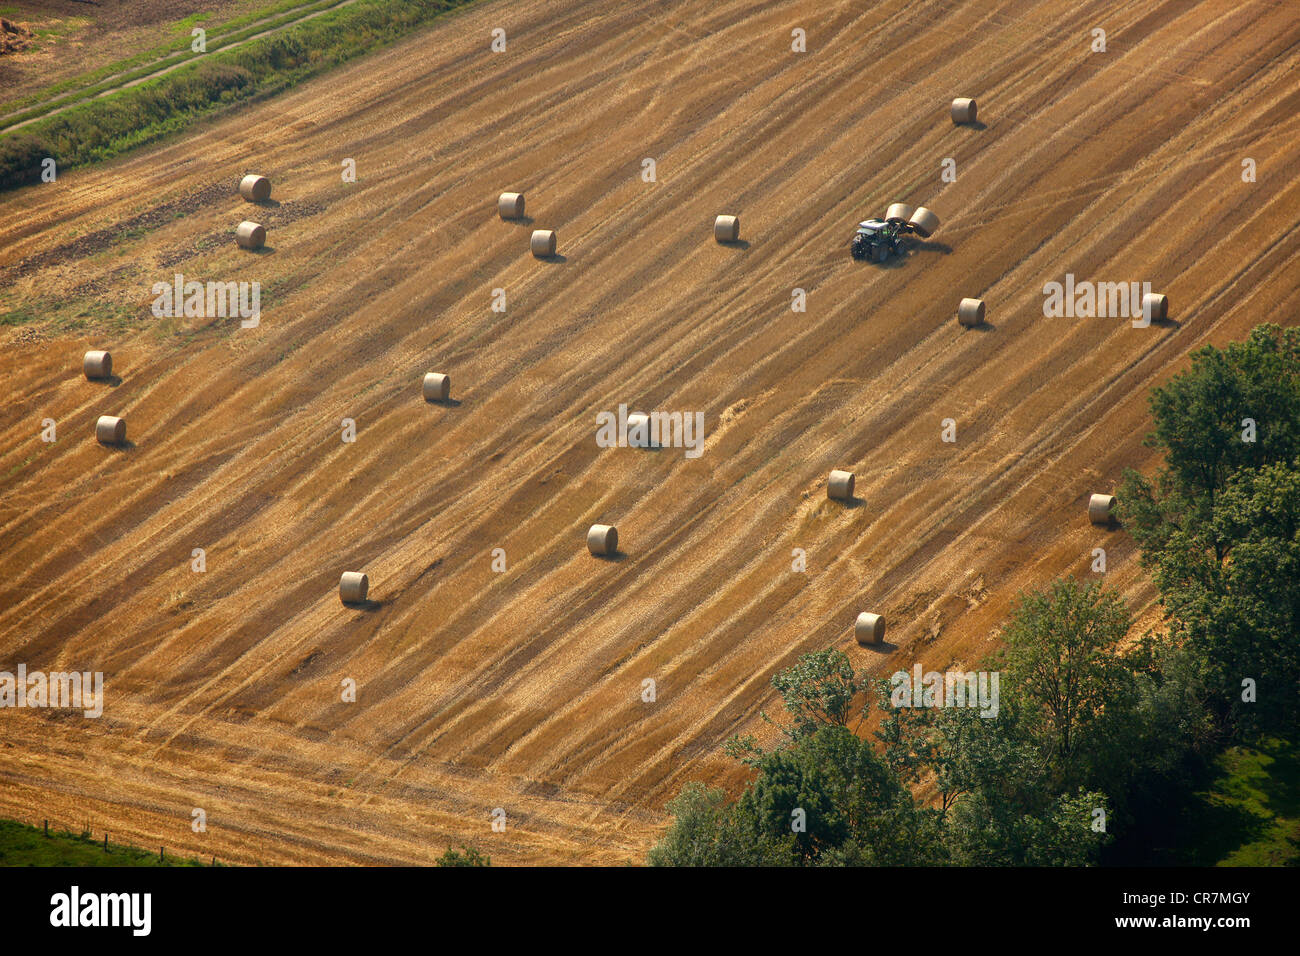 Aerial view, harvesting, straw bales and a tractor, Hamm, Ruhr area, North Rhine-Westphalia, Germany, Europe Stock Photo